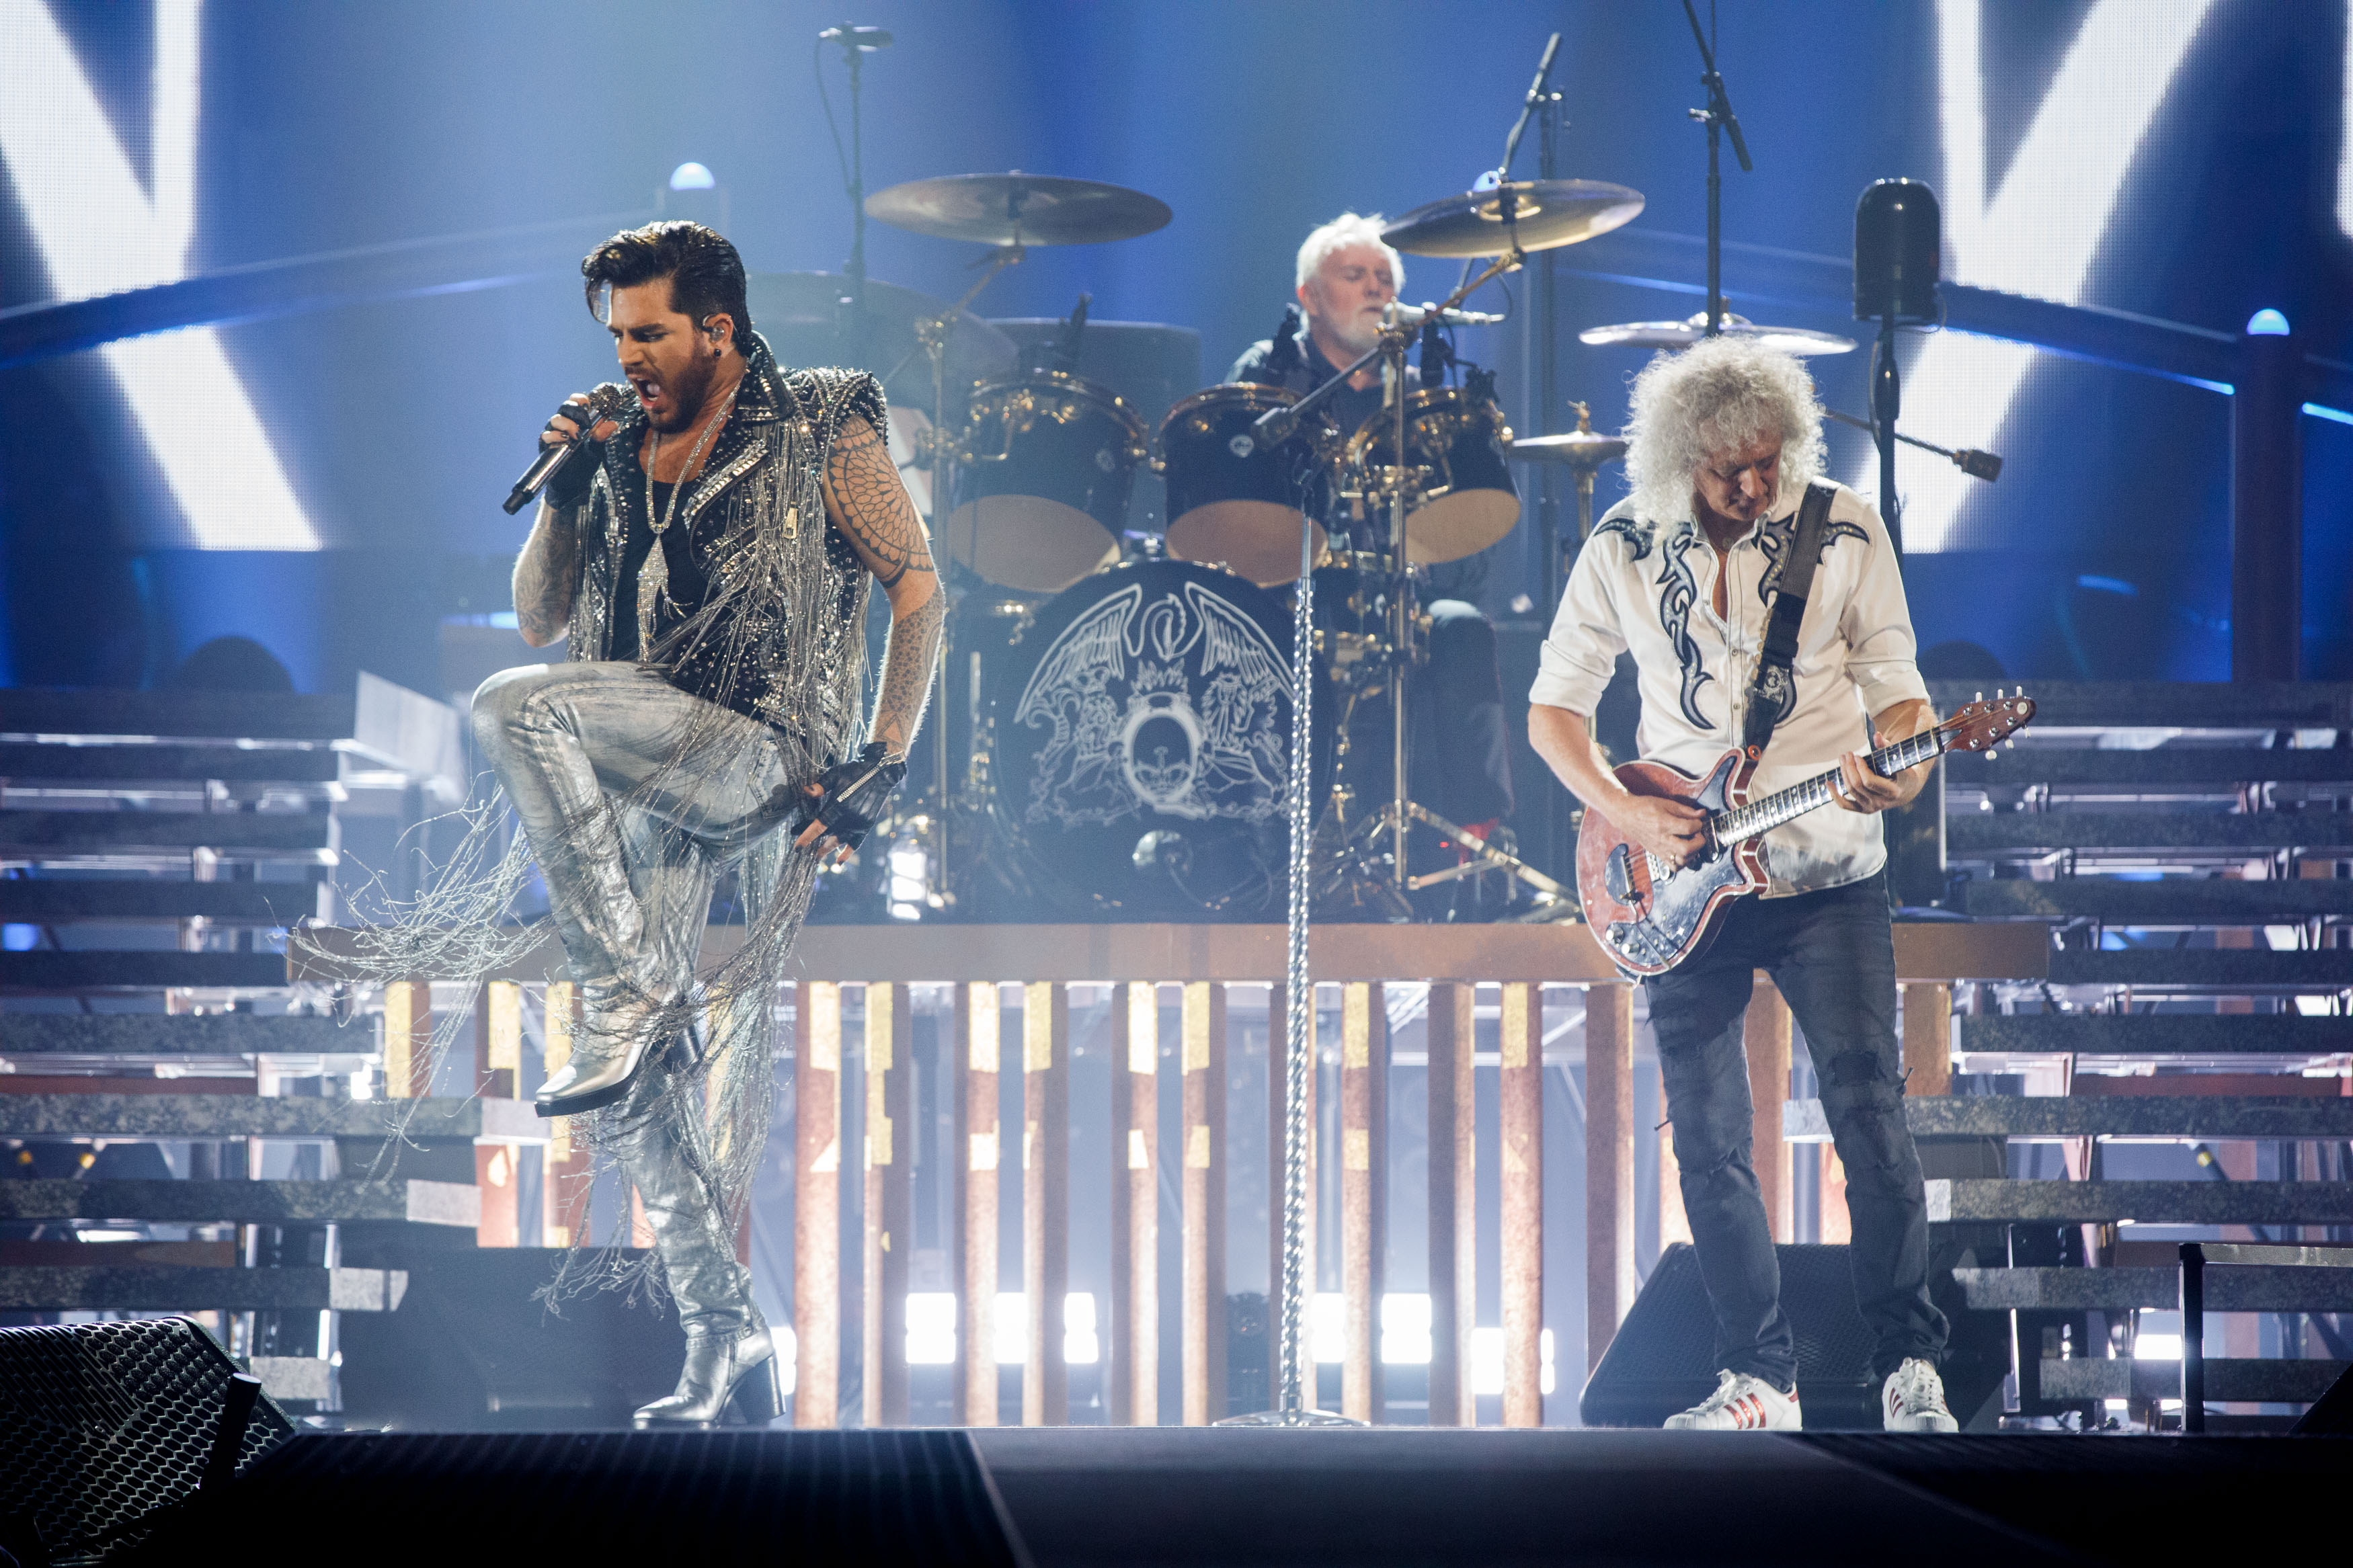 Adam Lambert on His First Live Album With Queen, Being Part of Band's Legacy